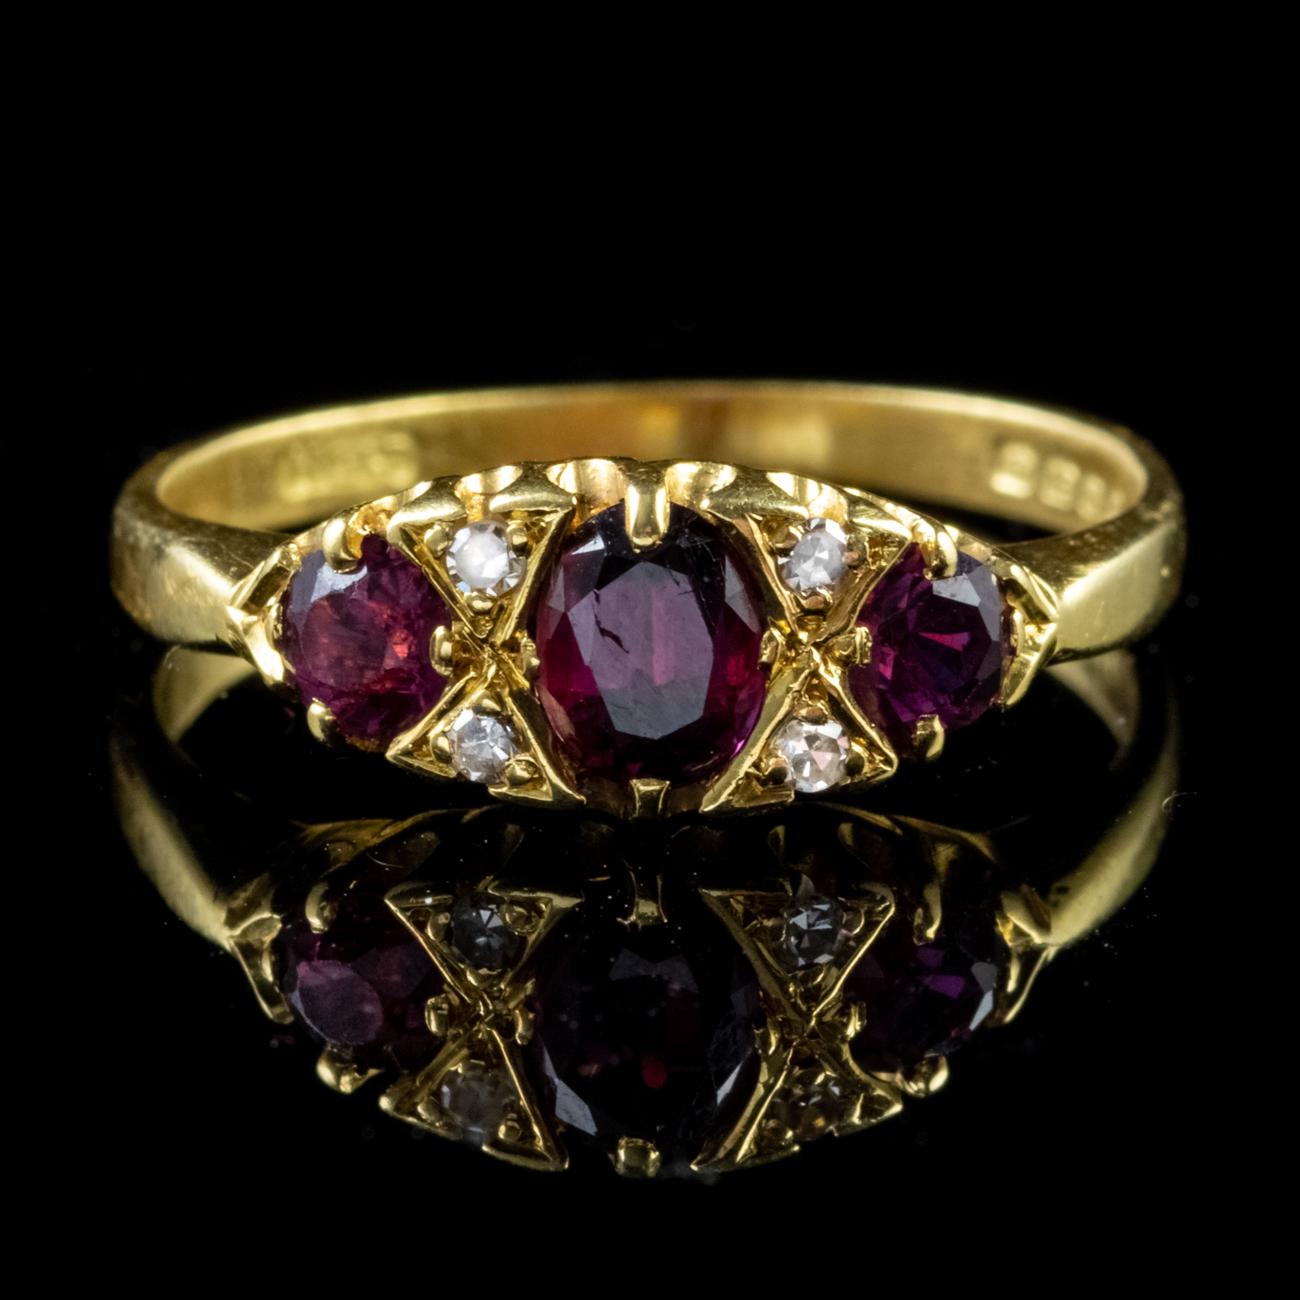 This stunning Vintage Gypsy ring has been modelled in 18ct Yellow Gold and set with a trilogy of deep red Rubies, with the central Ruby weighing 0.30ct and the Rubies either side weighing 0.20ct each. Nestled between the Rubies sit four sparkling